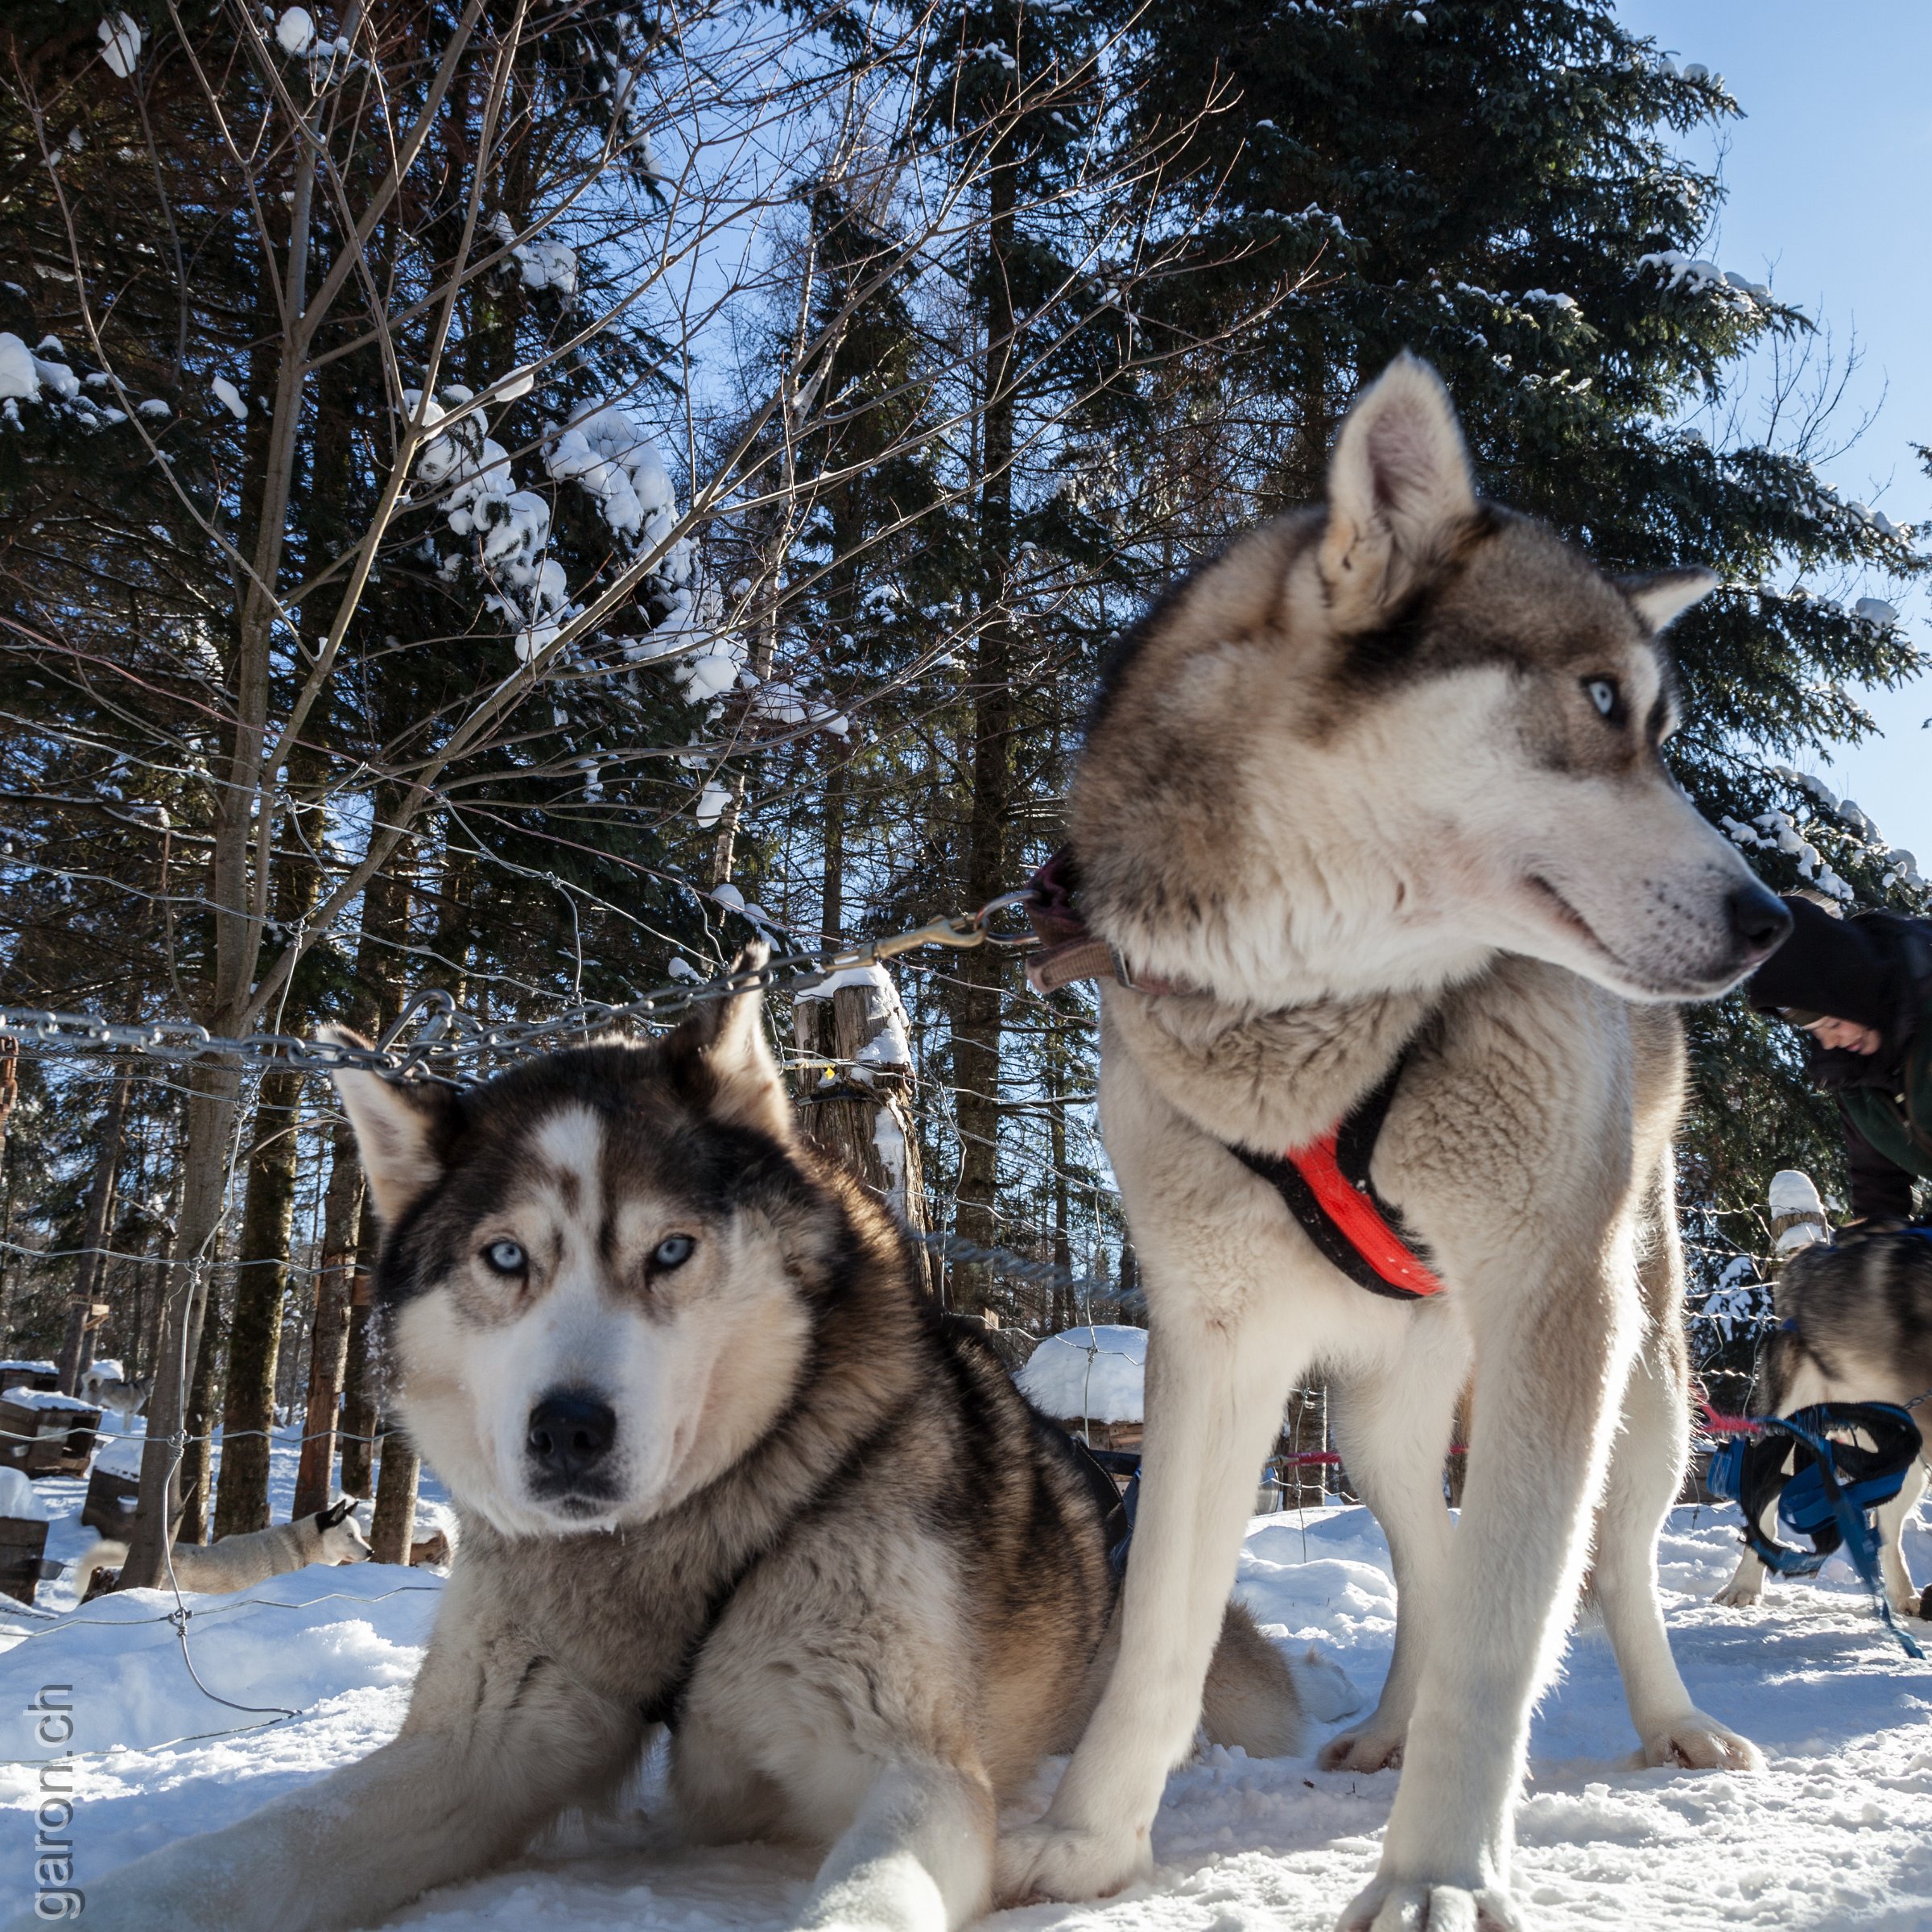 Expedition Wolf in Rivière-Rouge, Quebec, dog sledding with huskies 